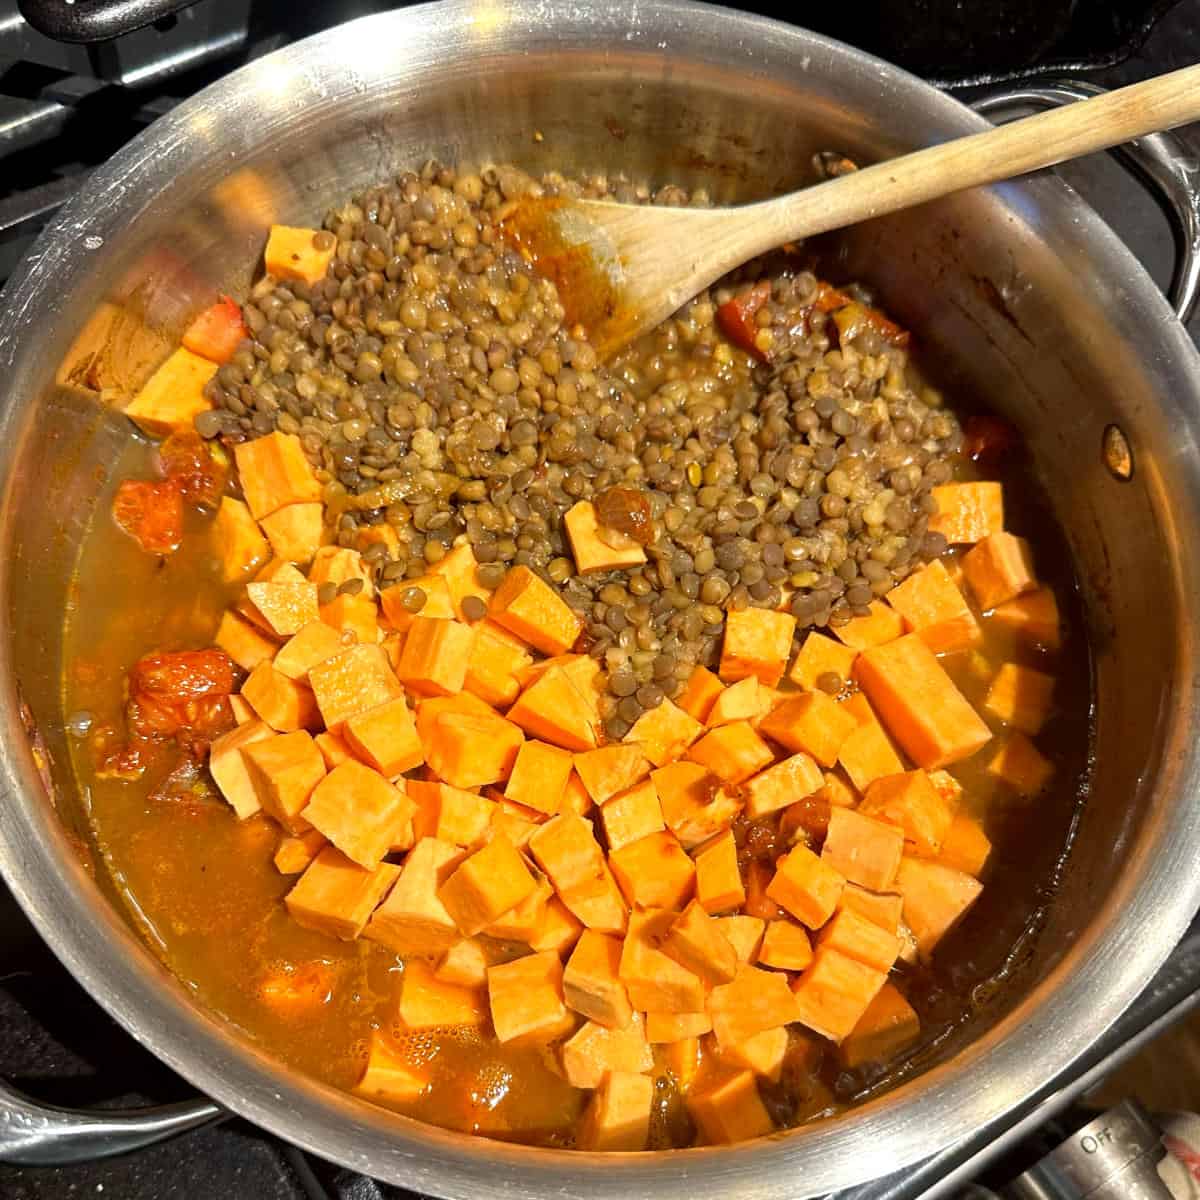 Lentils and sweet potatoes added to pot.